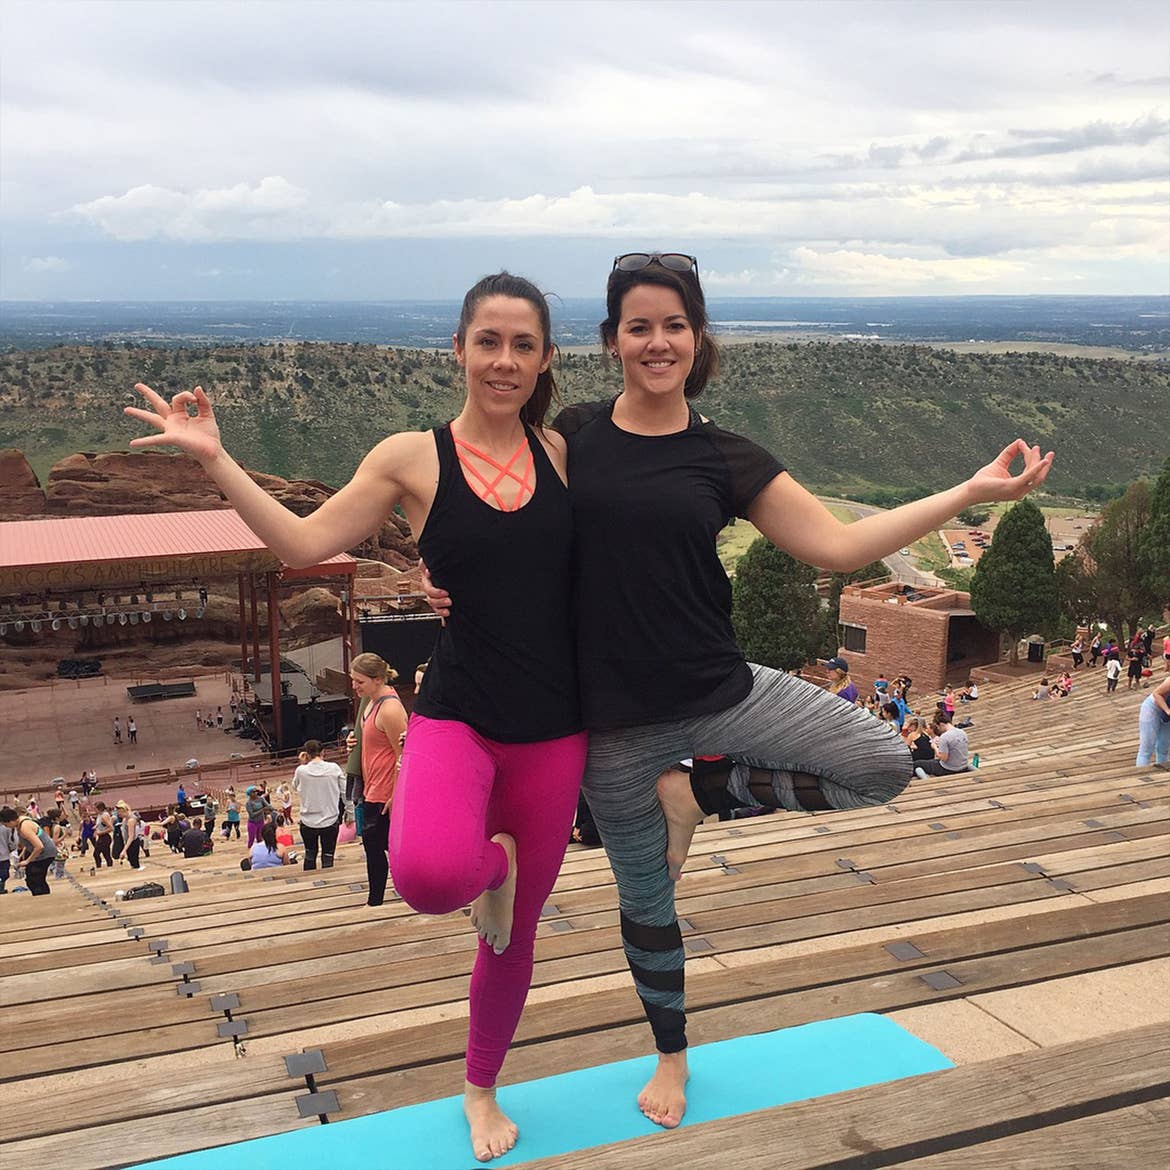 Jenn (right) completes a yoga pose with a friend outdoors at Red Rock Amphitheater.